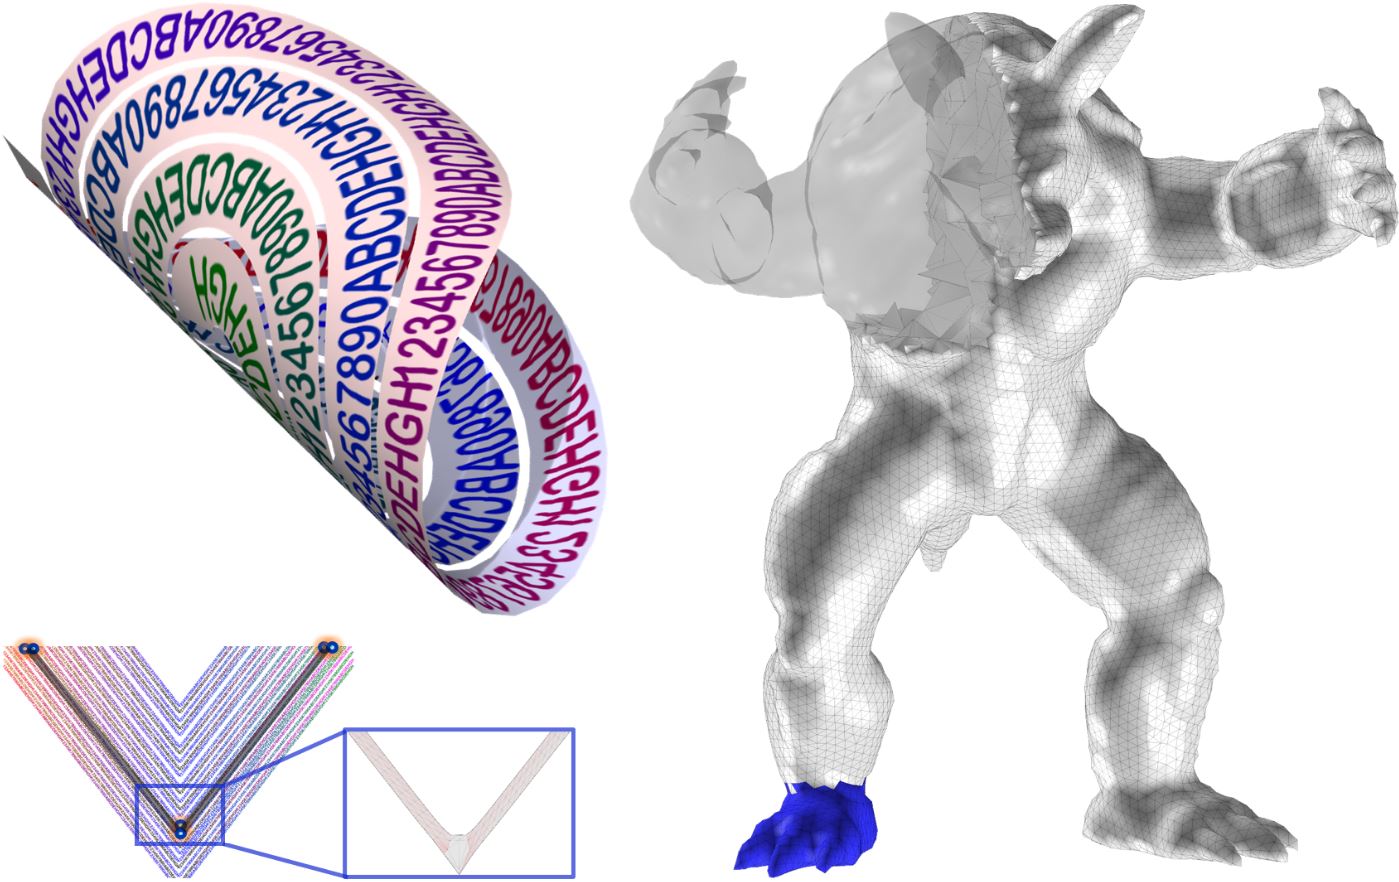 Constrained parameterization and locally injective volumetric mapping with ABCD algorithm.